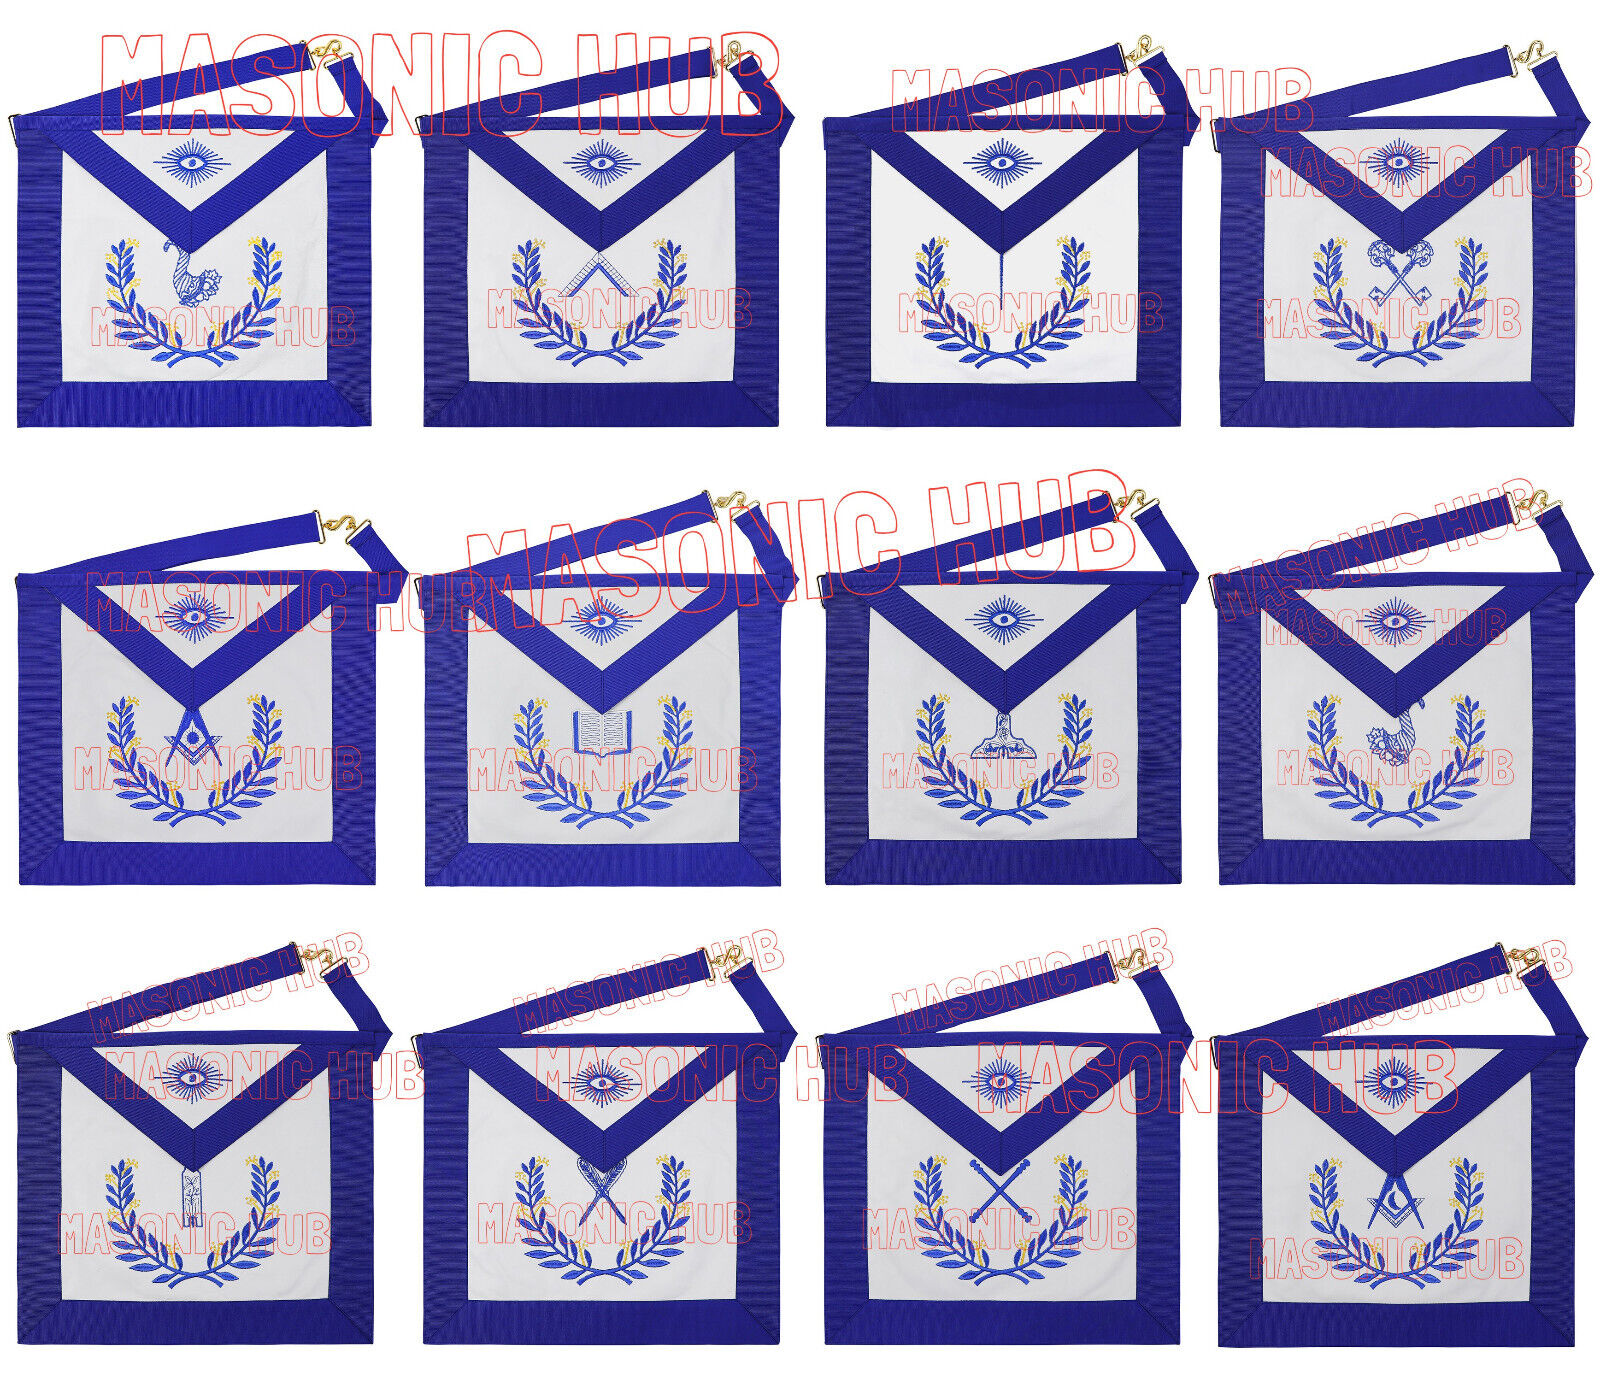 100% Lambskin Blue Lodge Officer Apron Collection -  A Set of 12 for the Elite